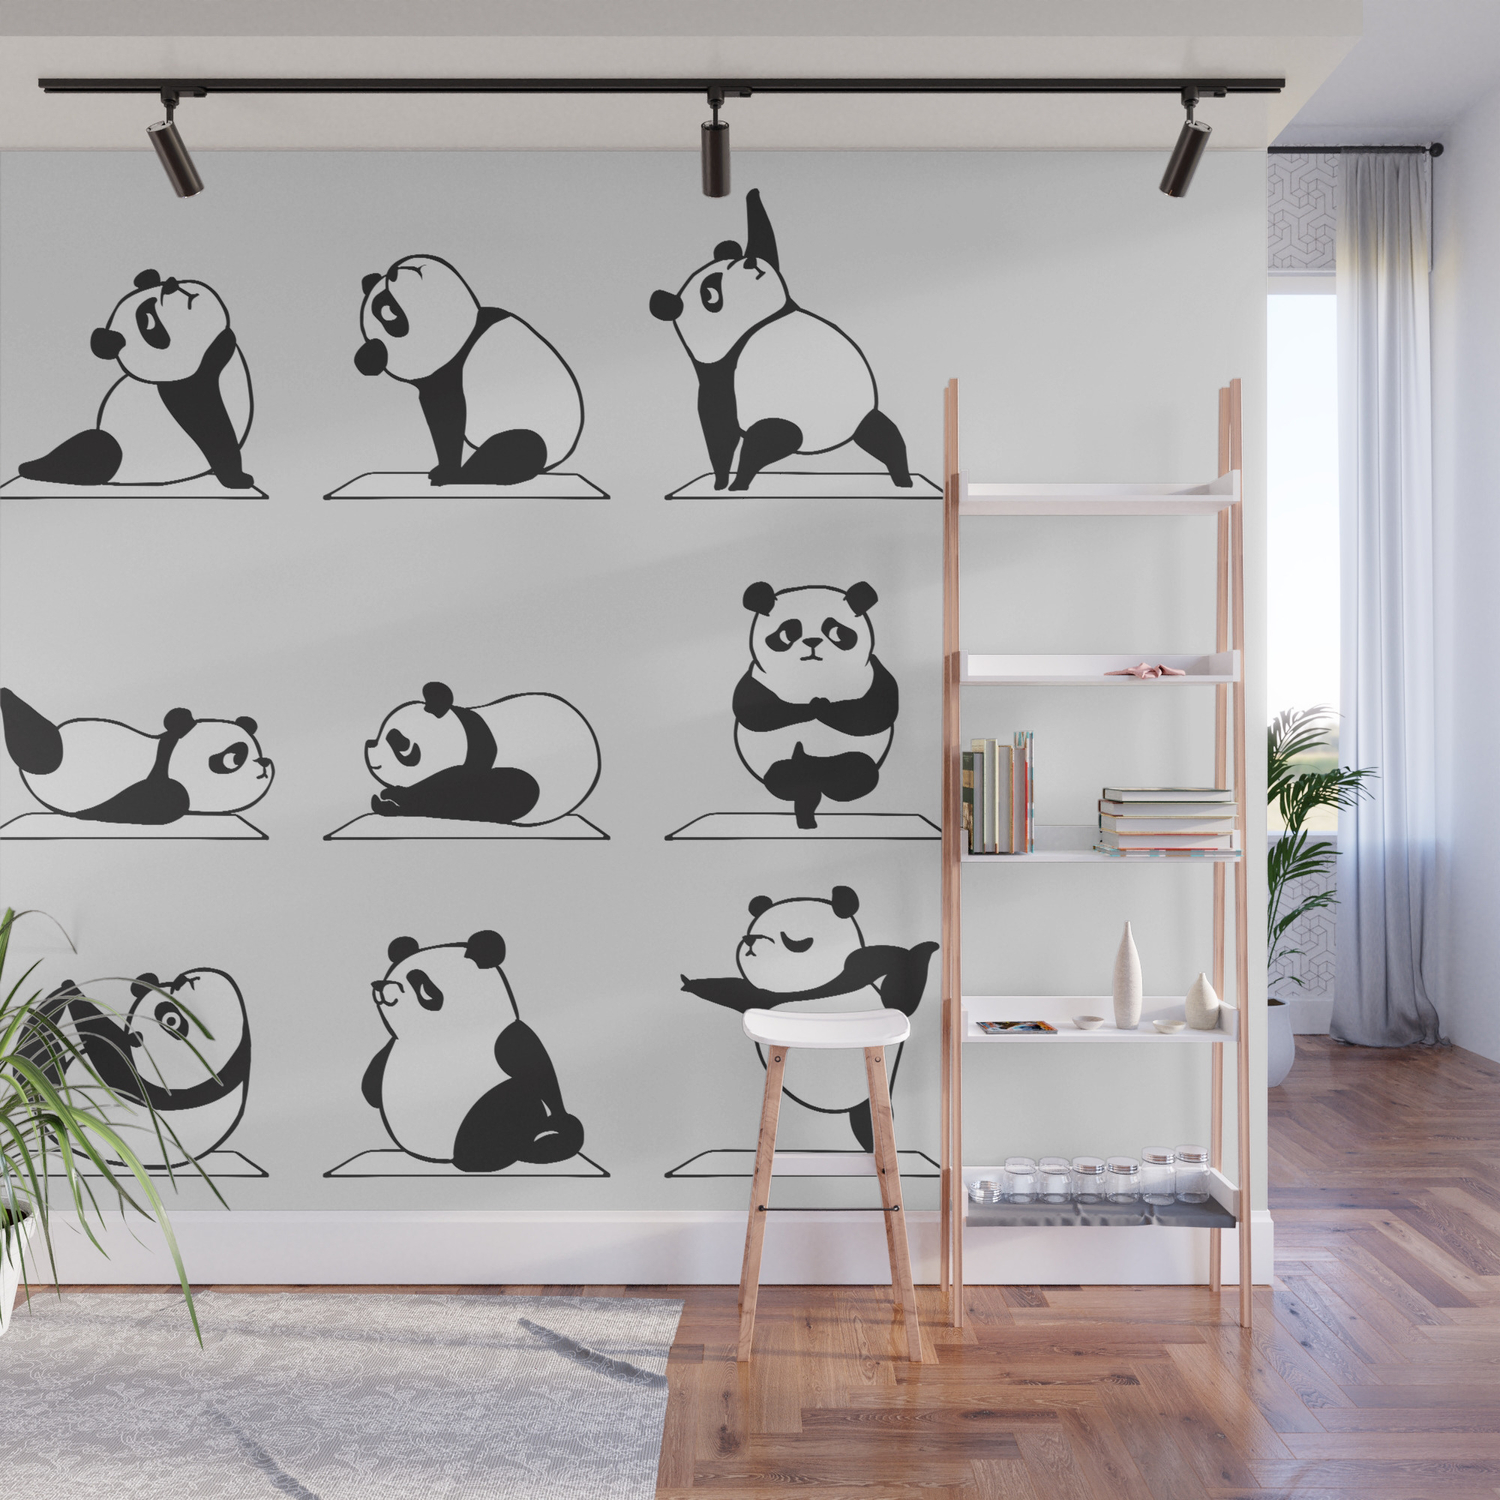 Design Your Own Wall Mural For The Home Gym Decoist Home Gym Design Home Gym Decor Home Gym Flooring